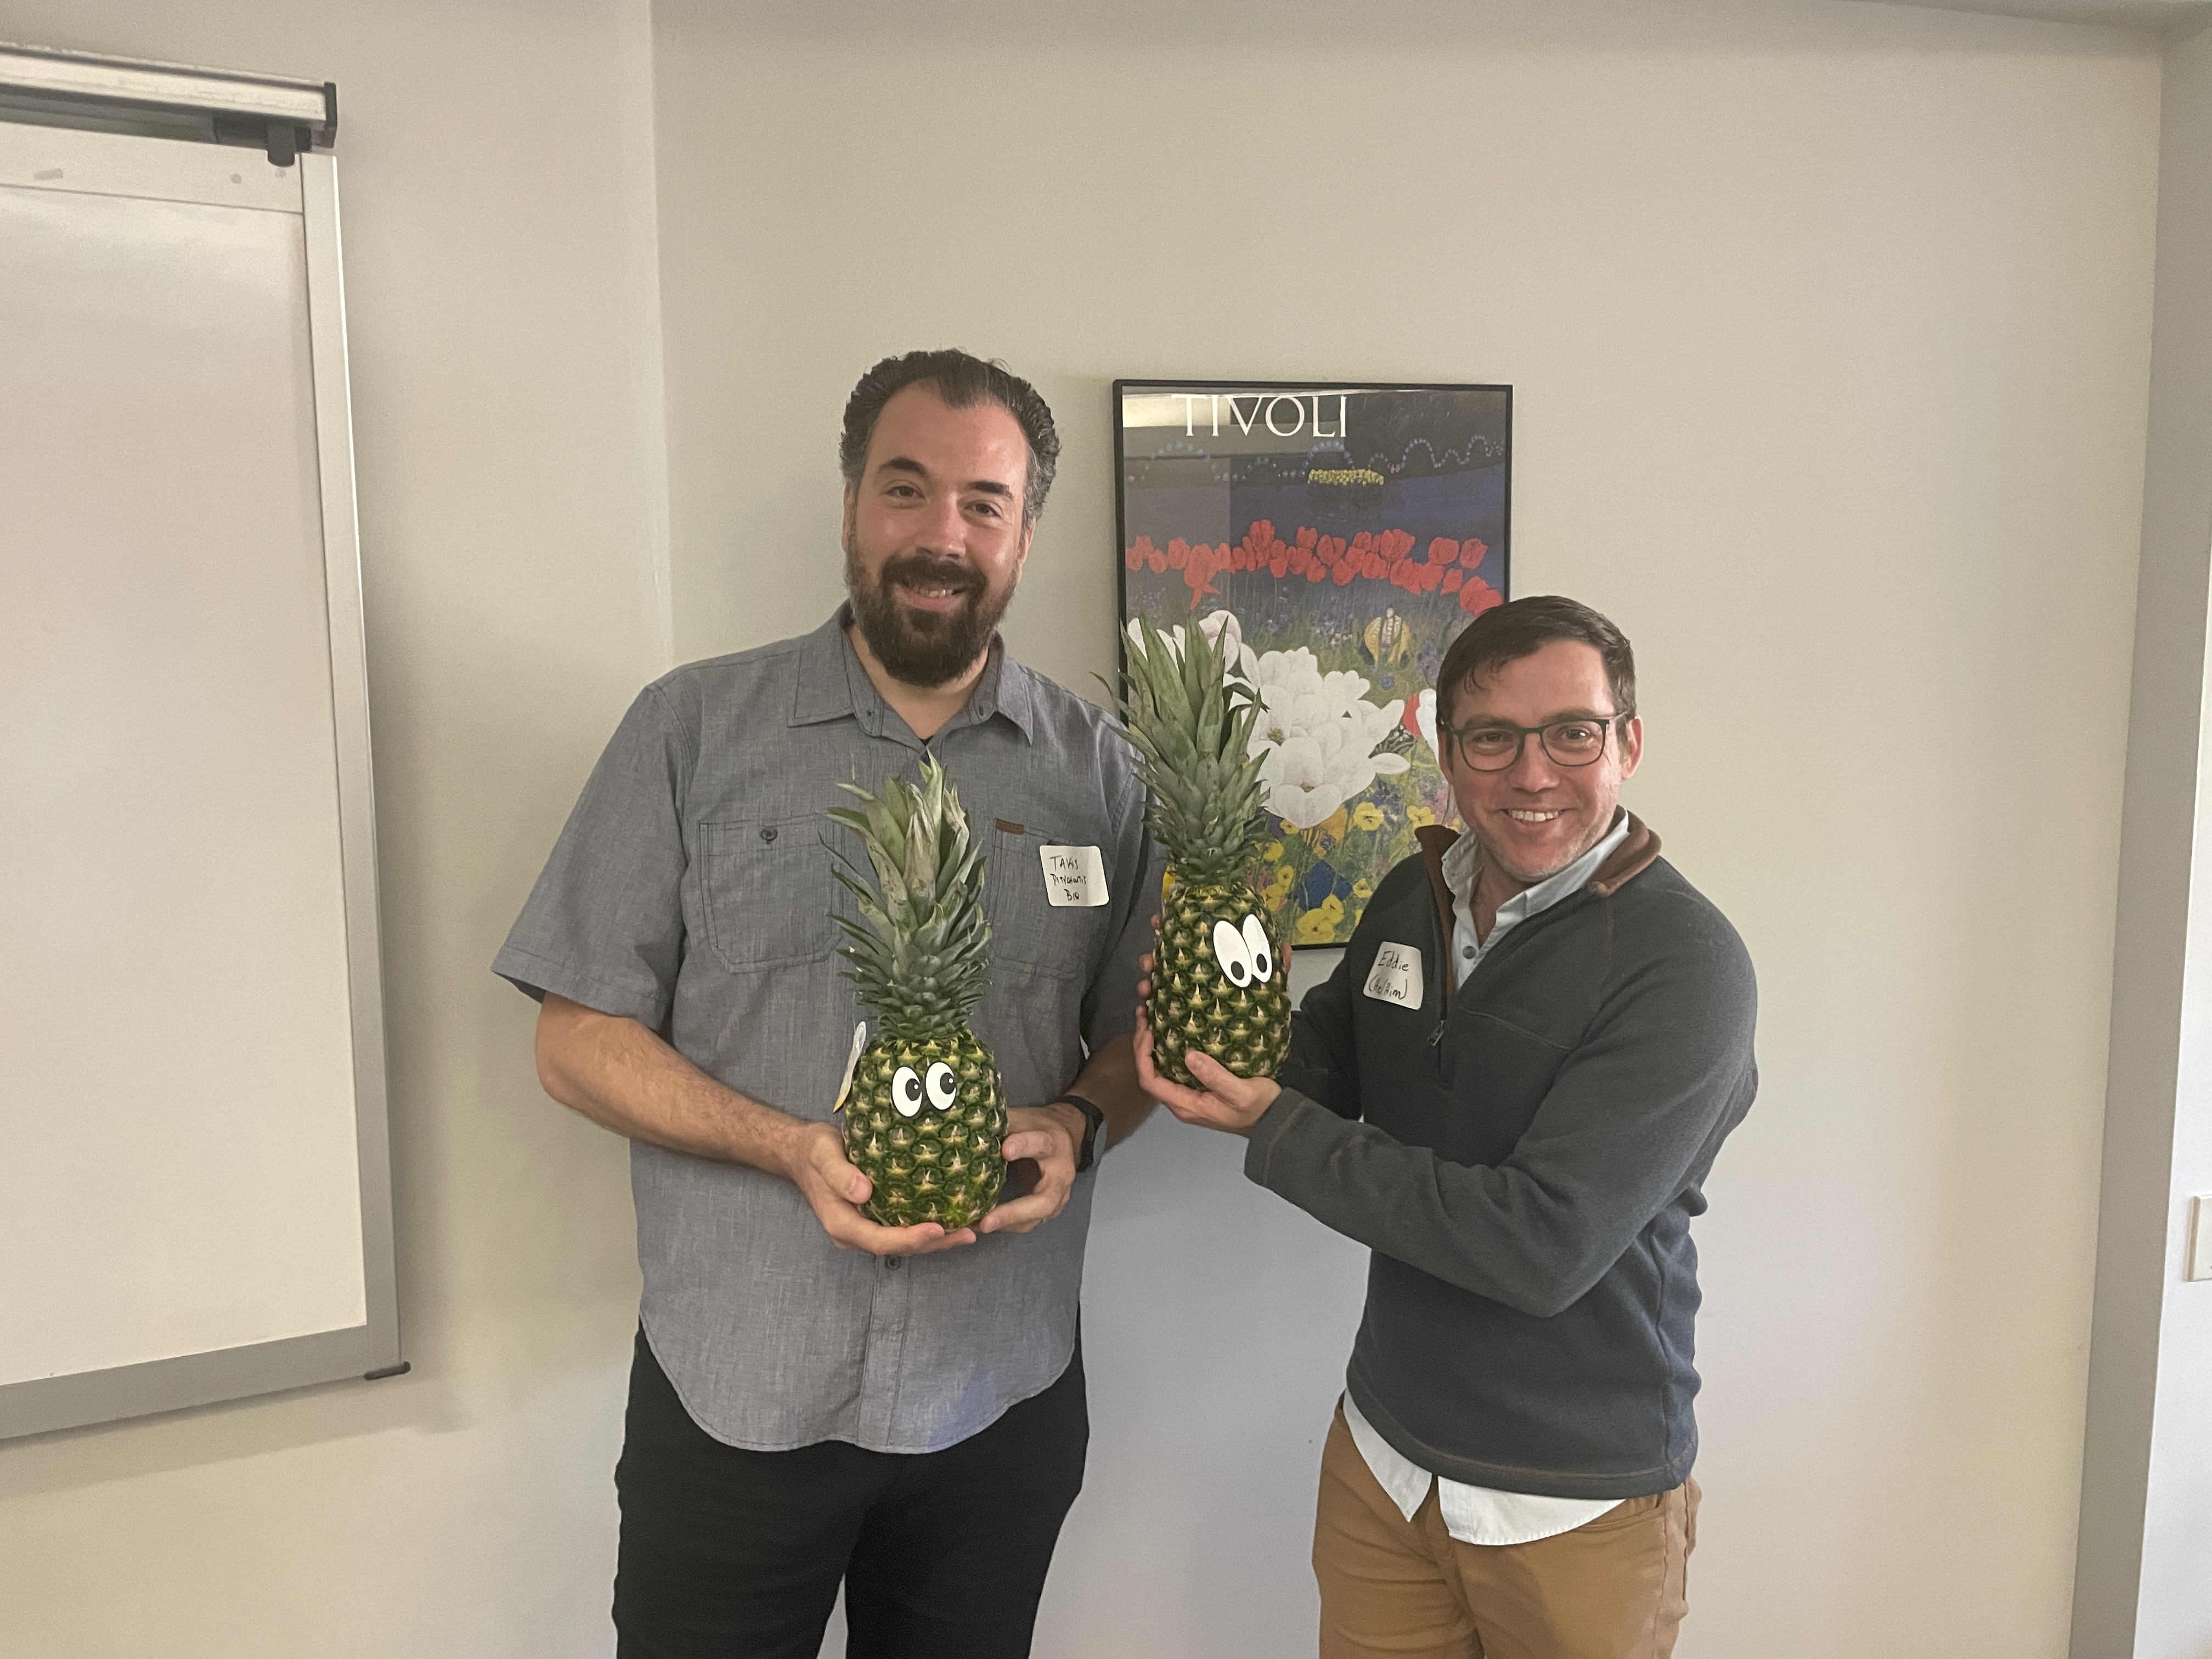 Faculty members Pothitos Pitychoutis and Eddie Glayzer pose with pineapples to signify their graduation from ATLS.